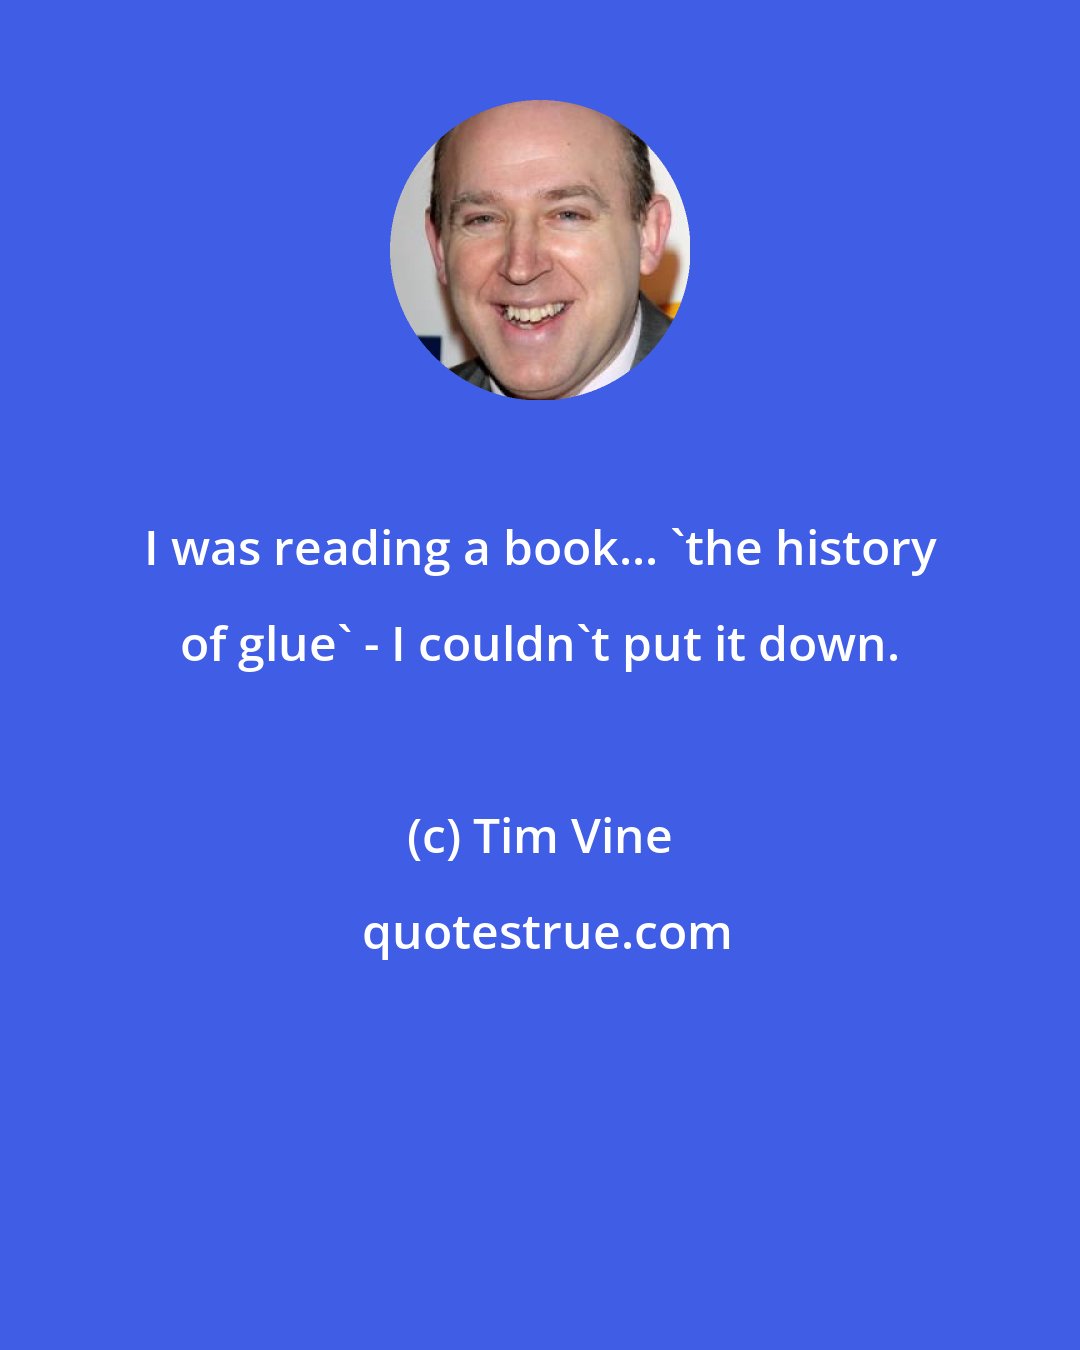 Tim Vine: I was reading a book... 'the history of glue' - I couldn't put it down.